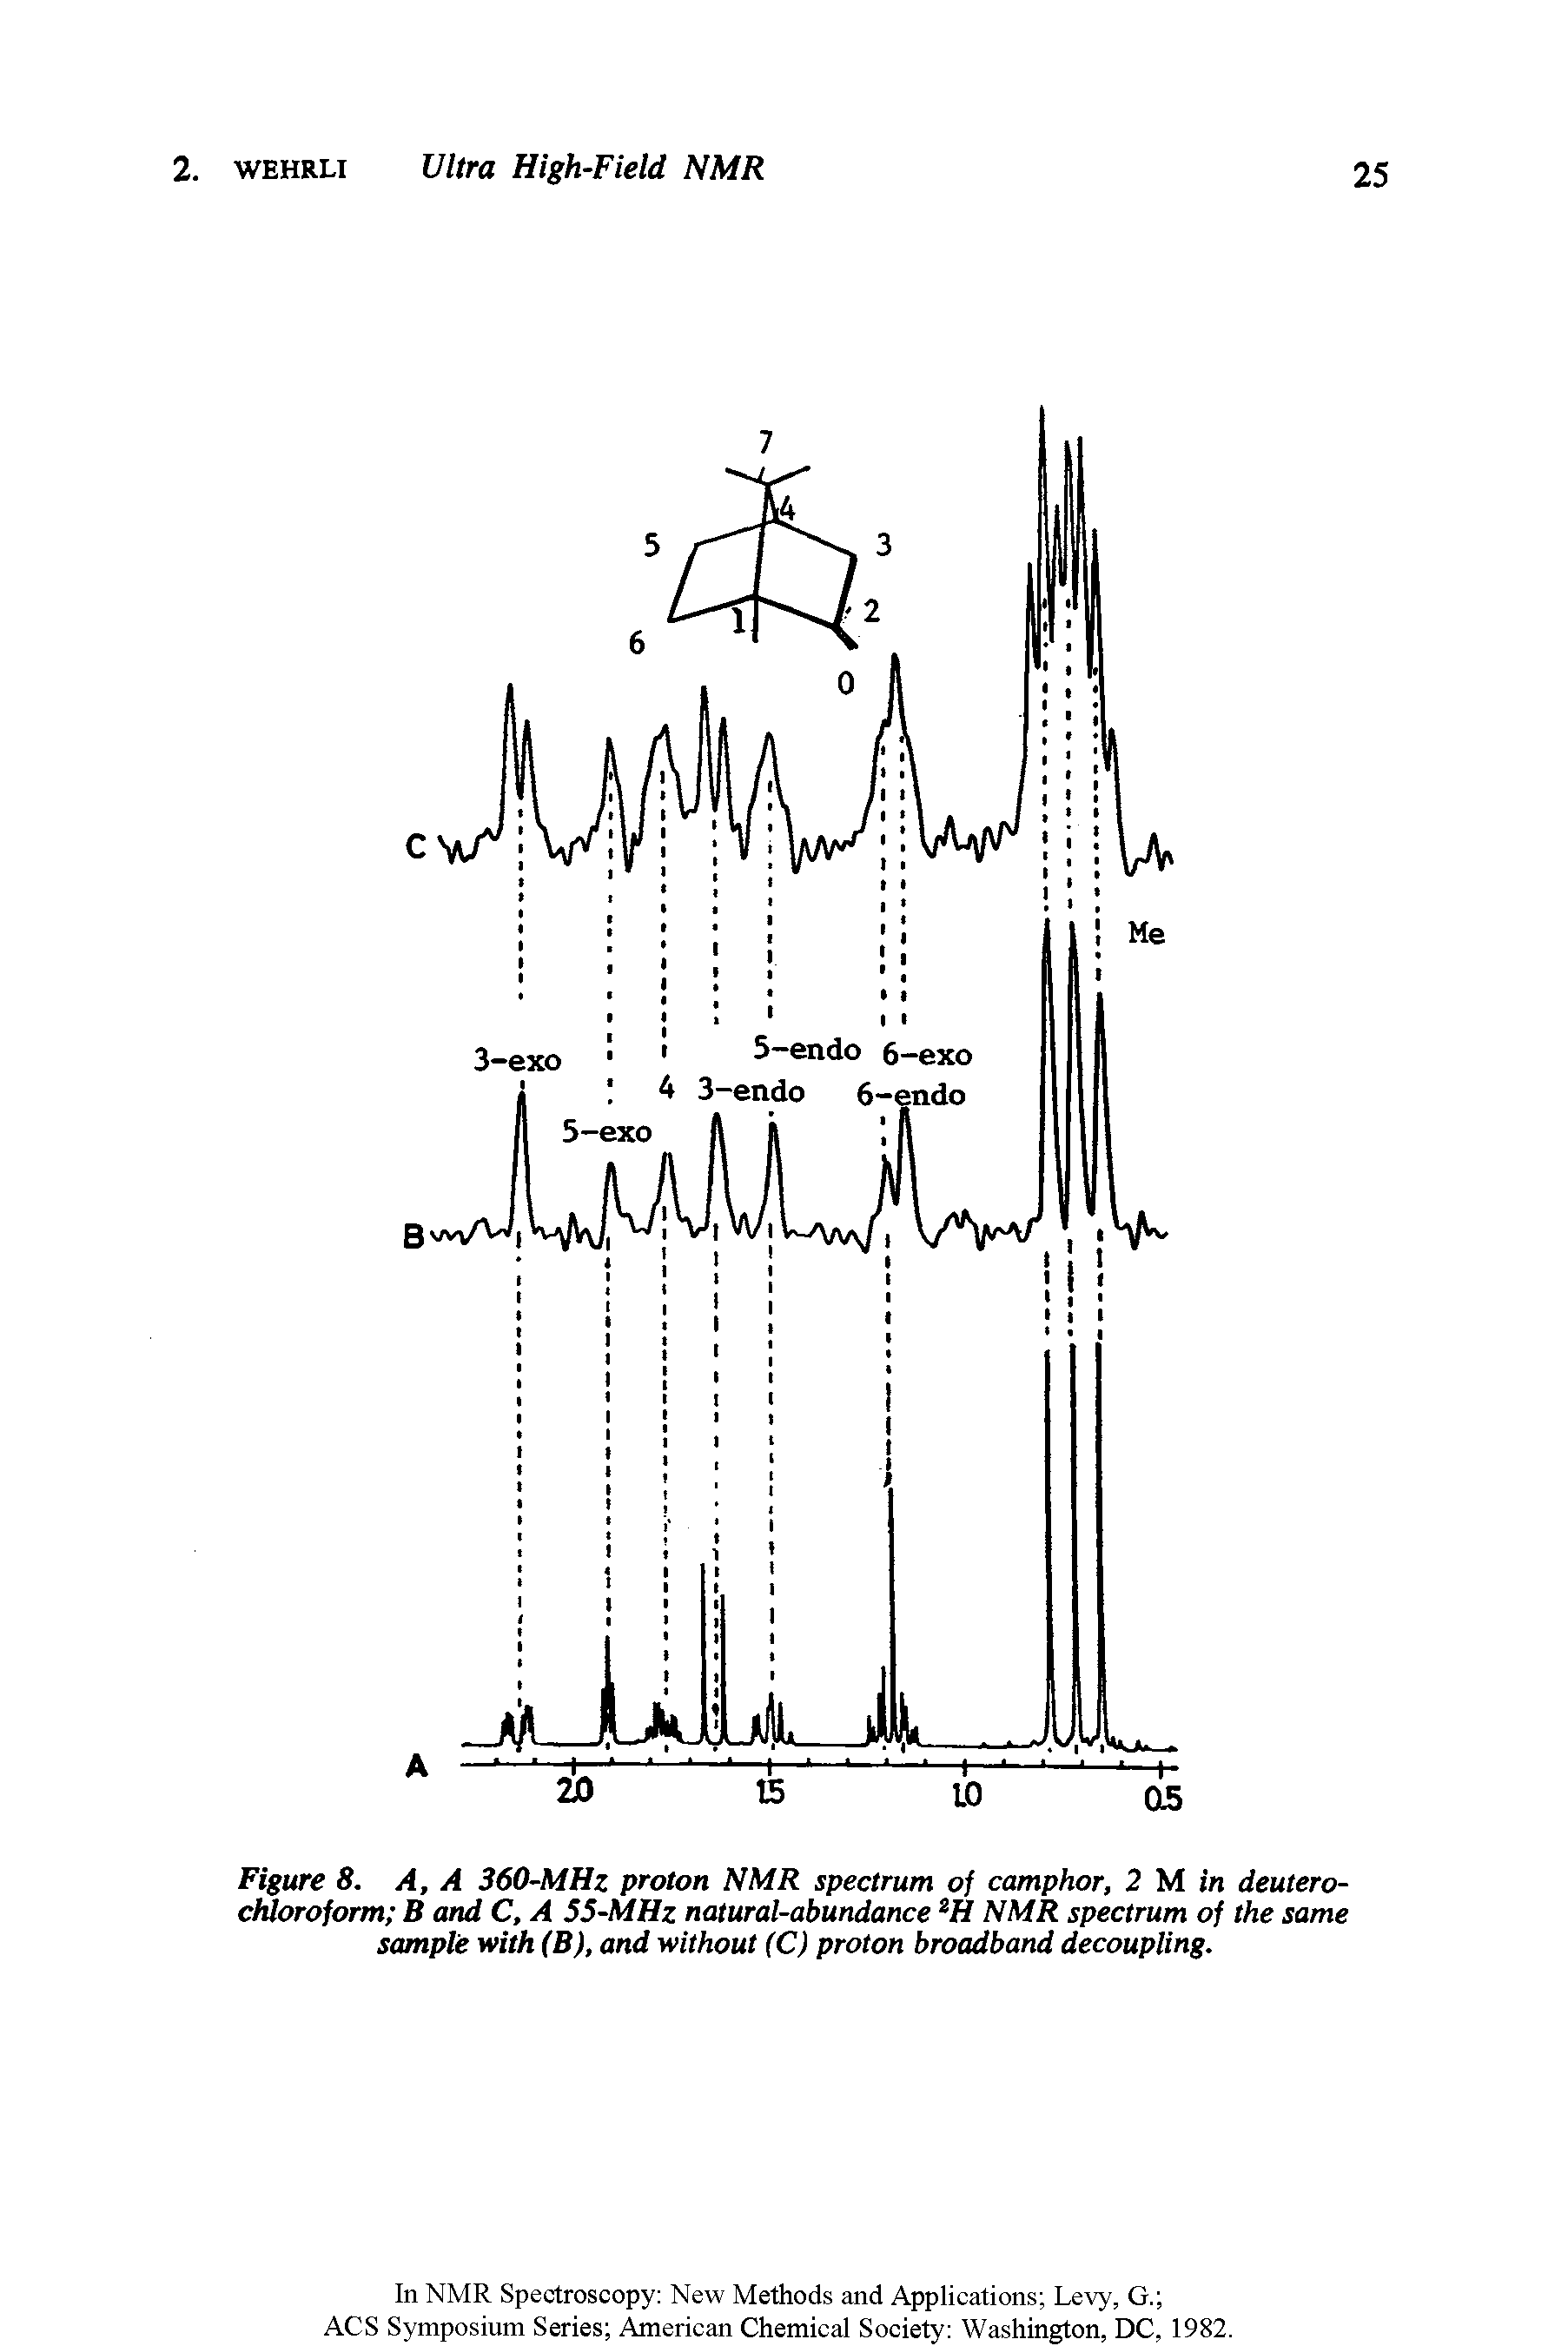 Figure 8. A, A 360-MHz proton NMR spectrum of camphor, 2 M in deutero-chloroform B and C, A 55-MHz natural-abundance NMR spectrum of the same sample with (B), and without (C) proton broadband decoupling.